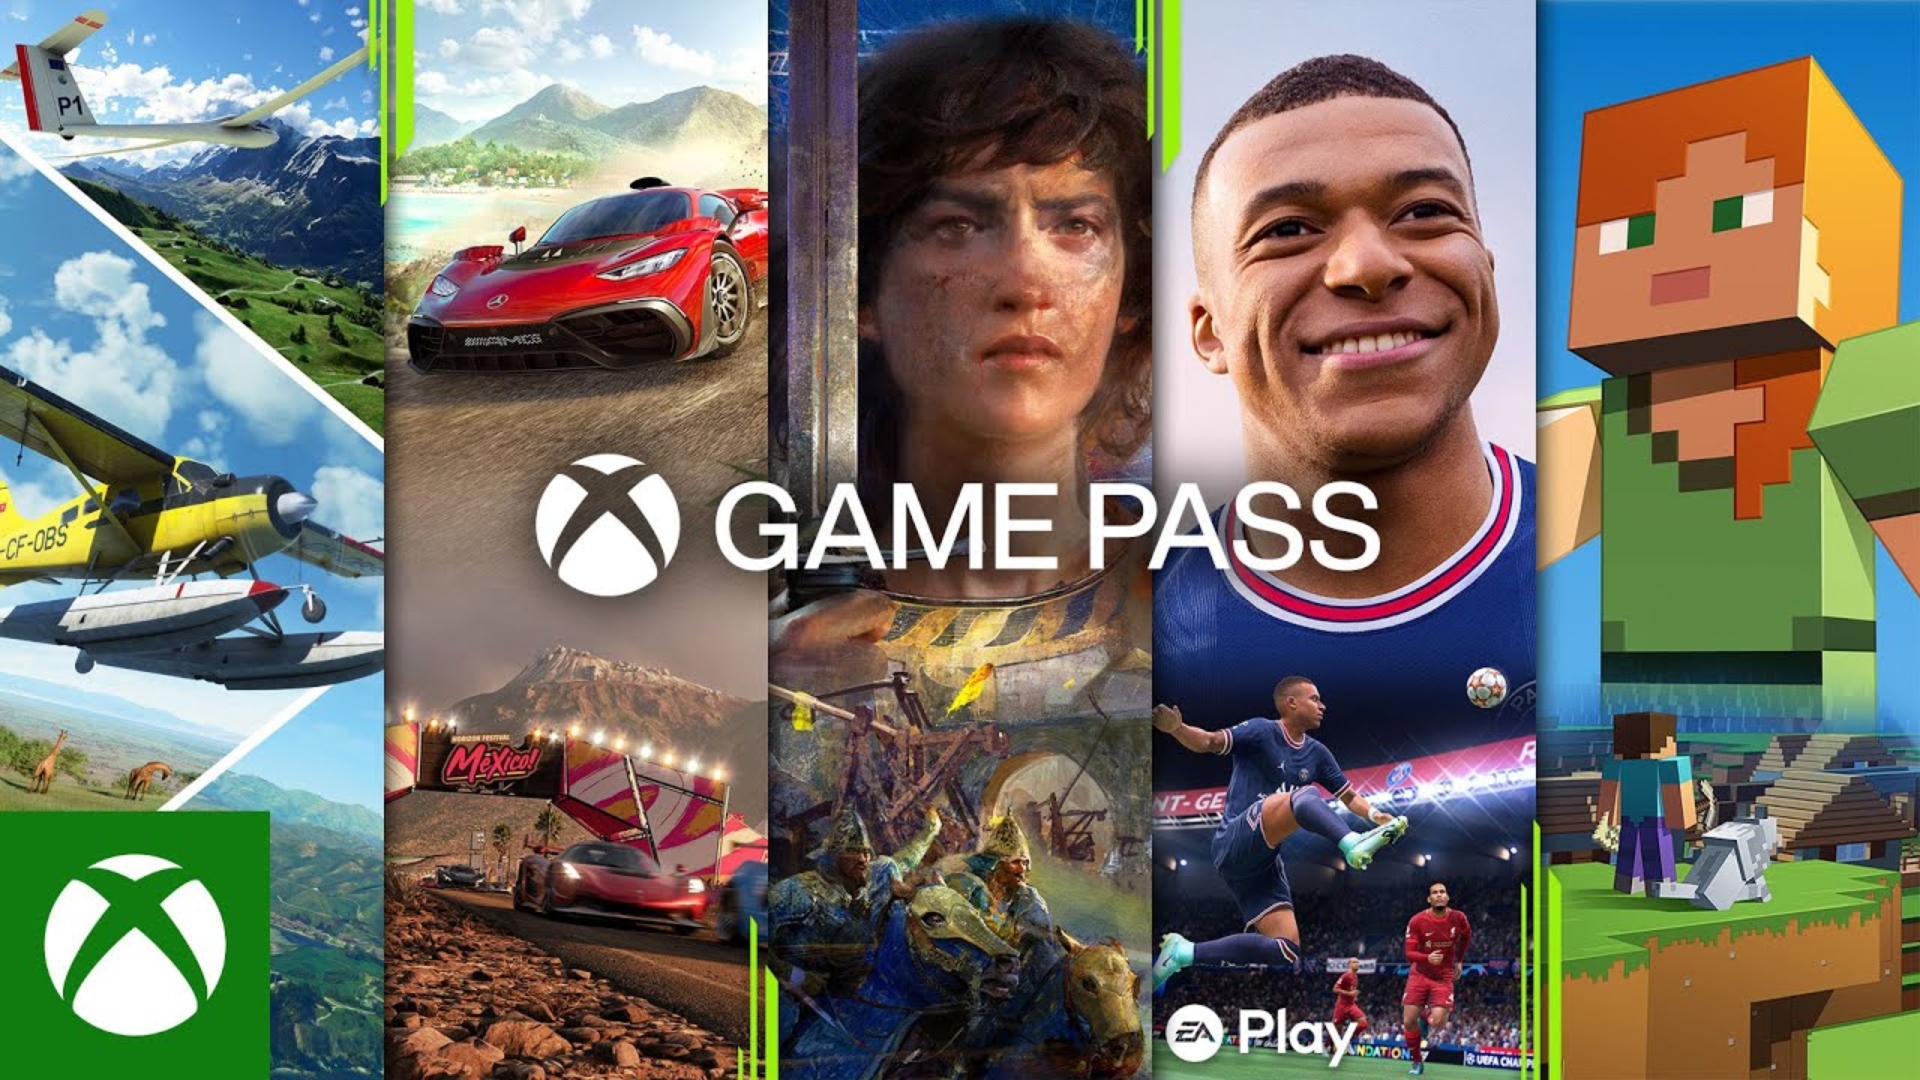 Huge Ubisoft RPG free on Xbox Game Pass just in time for the holidays